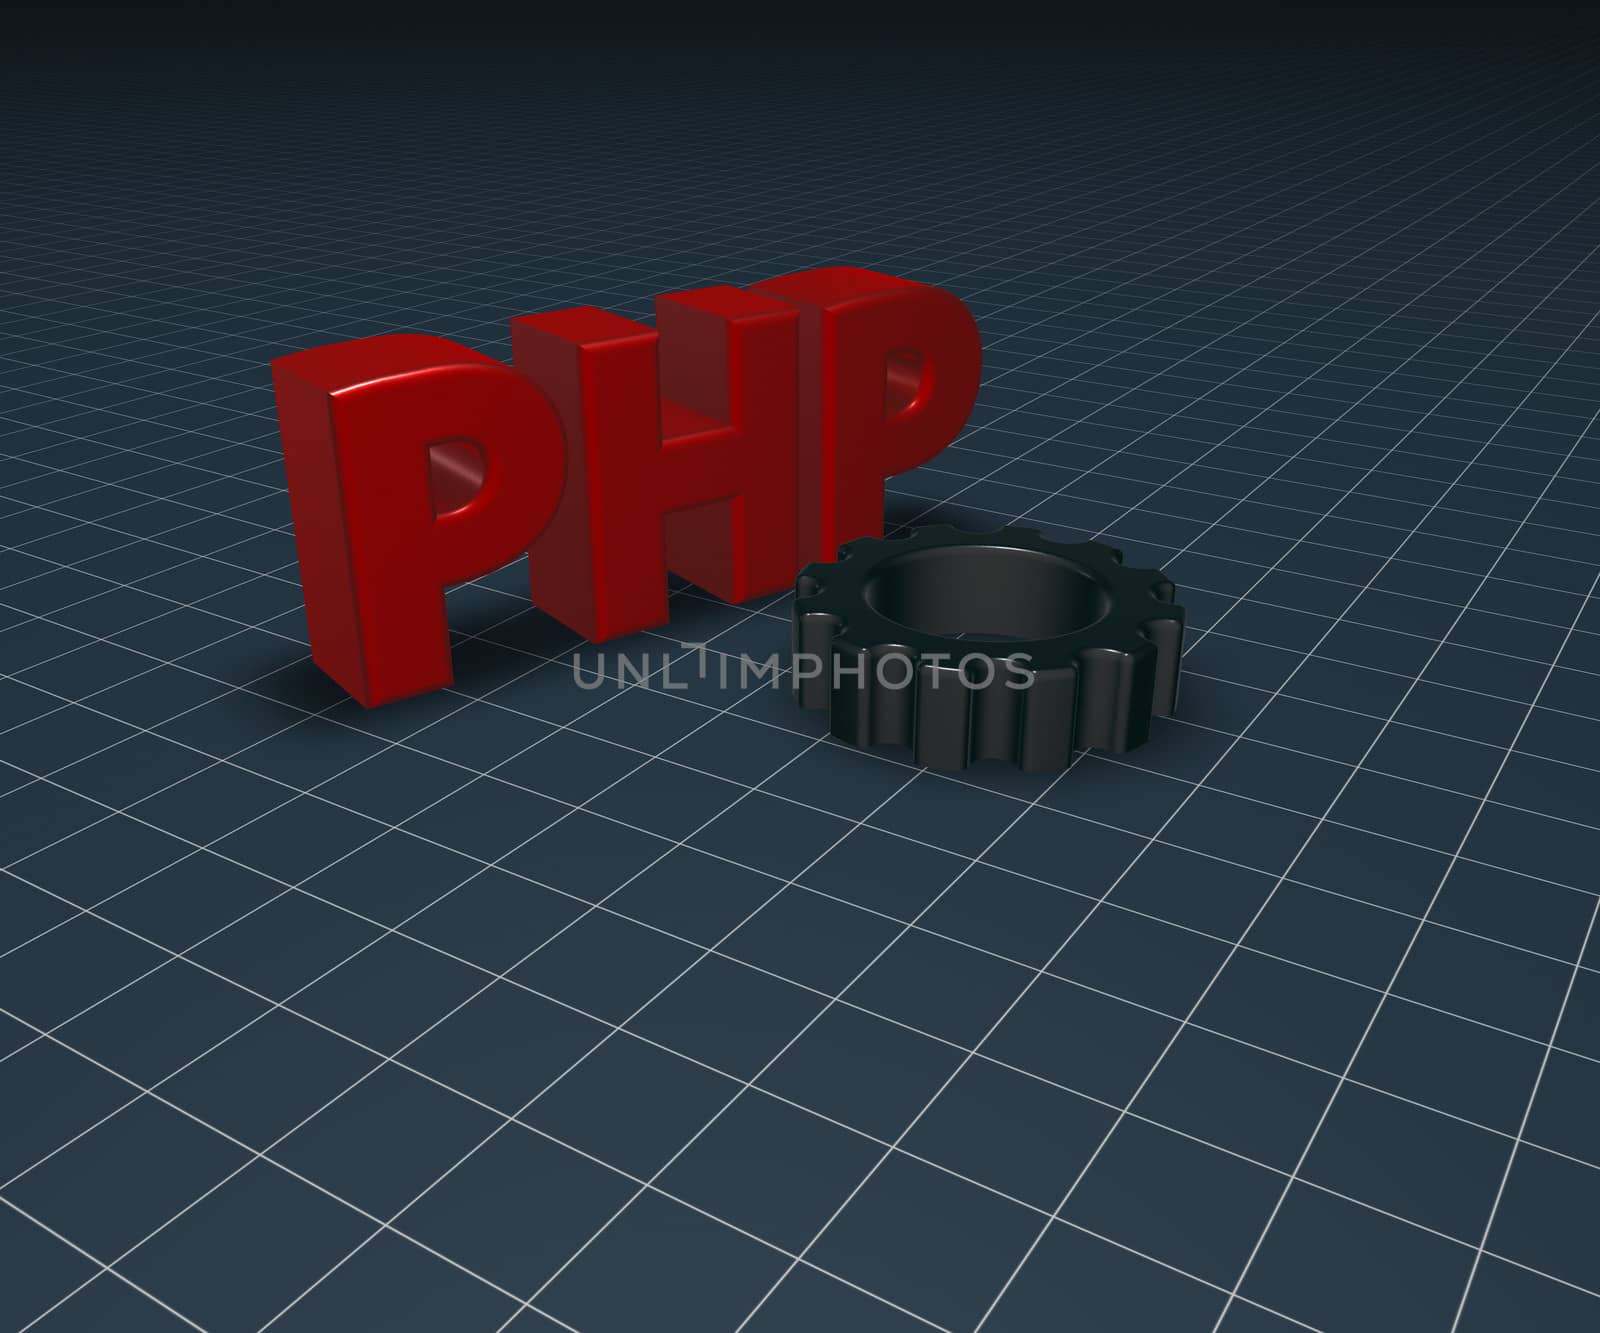 php tag and cogwheel on blue squared surface - 3d illustration